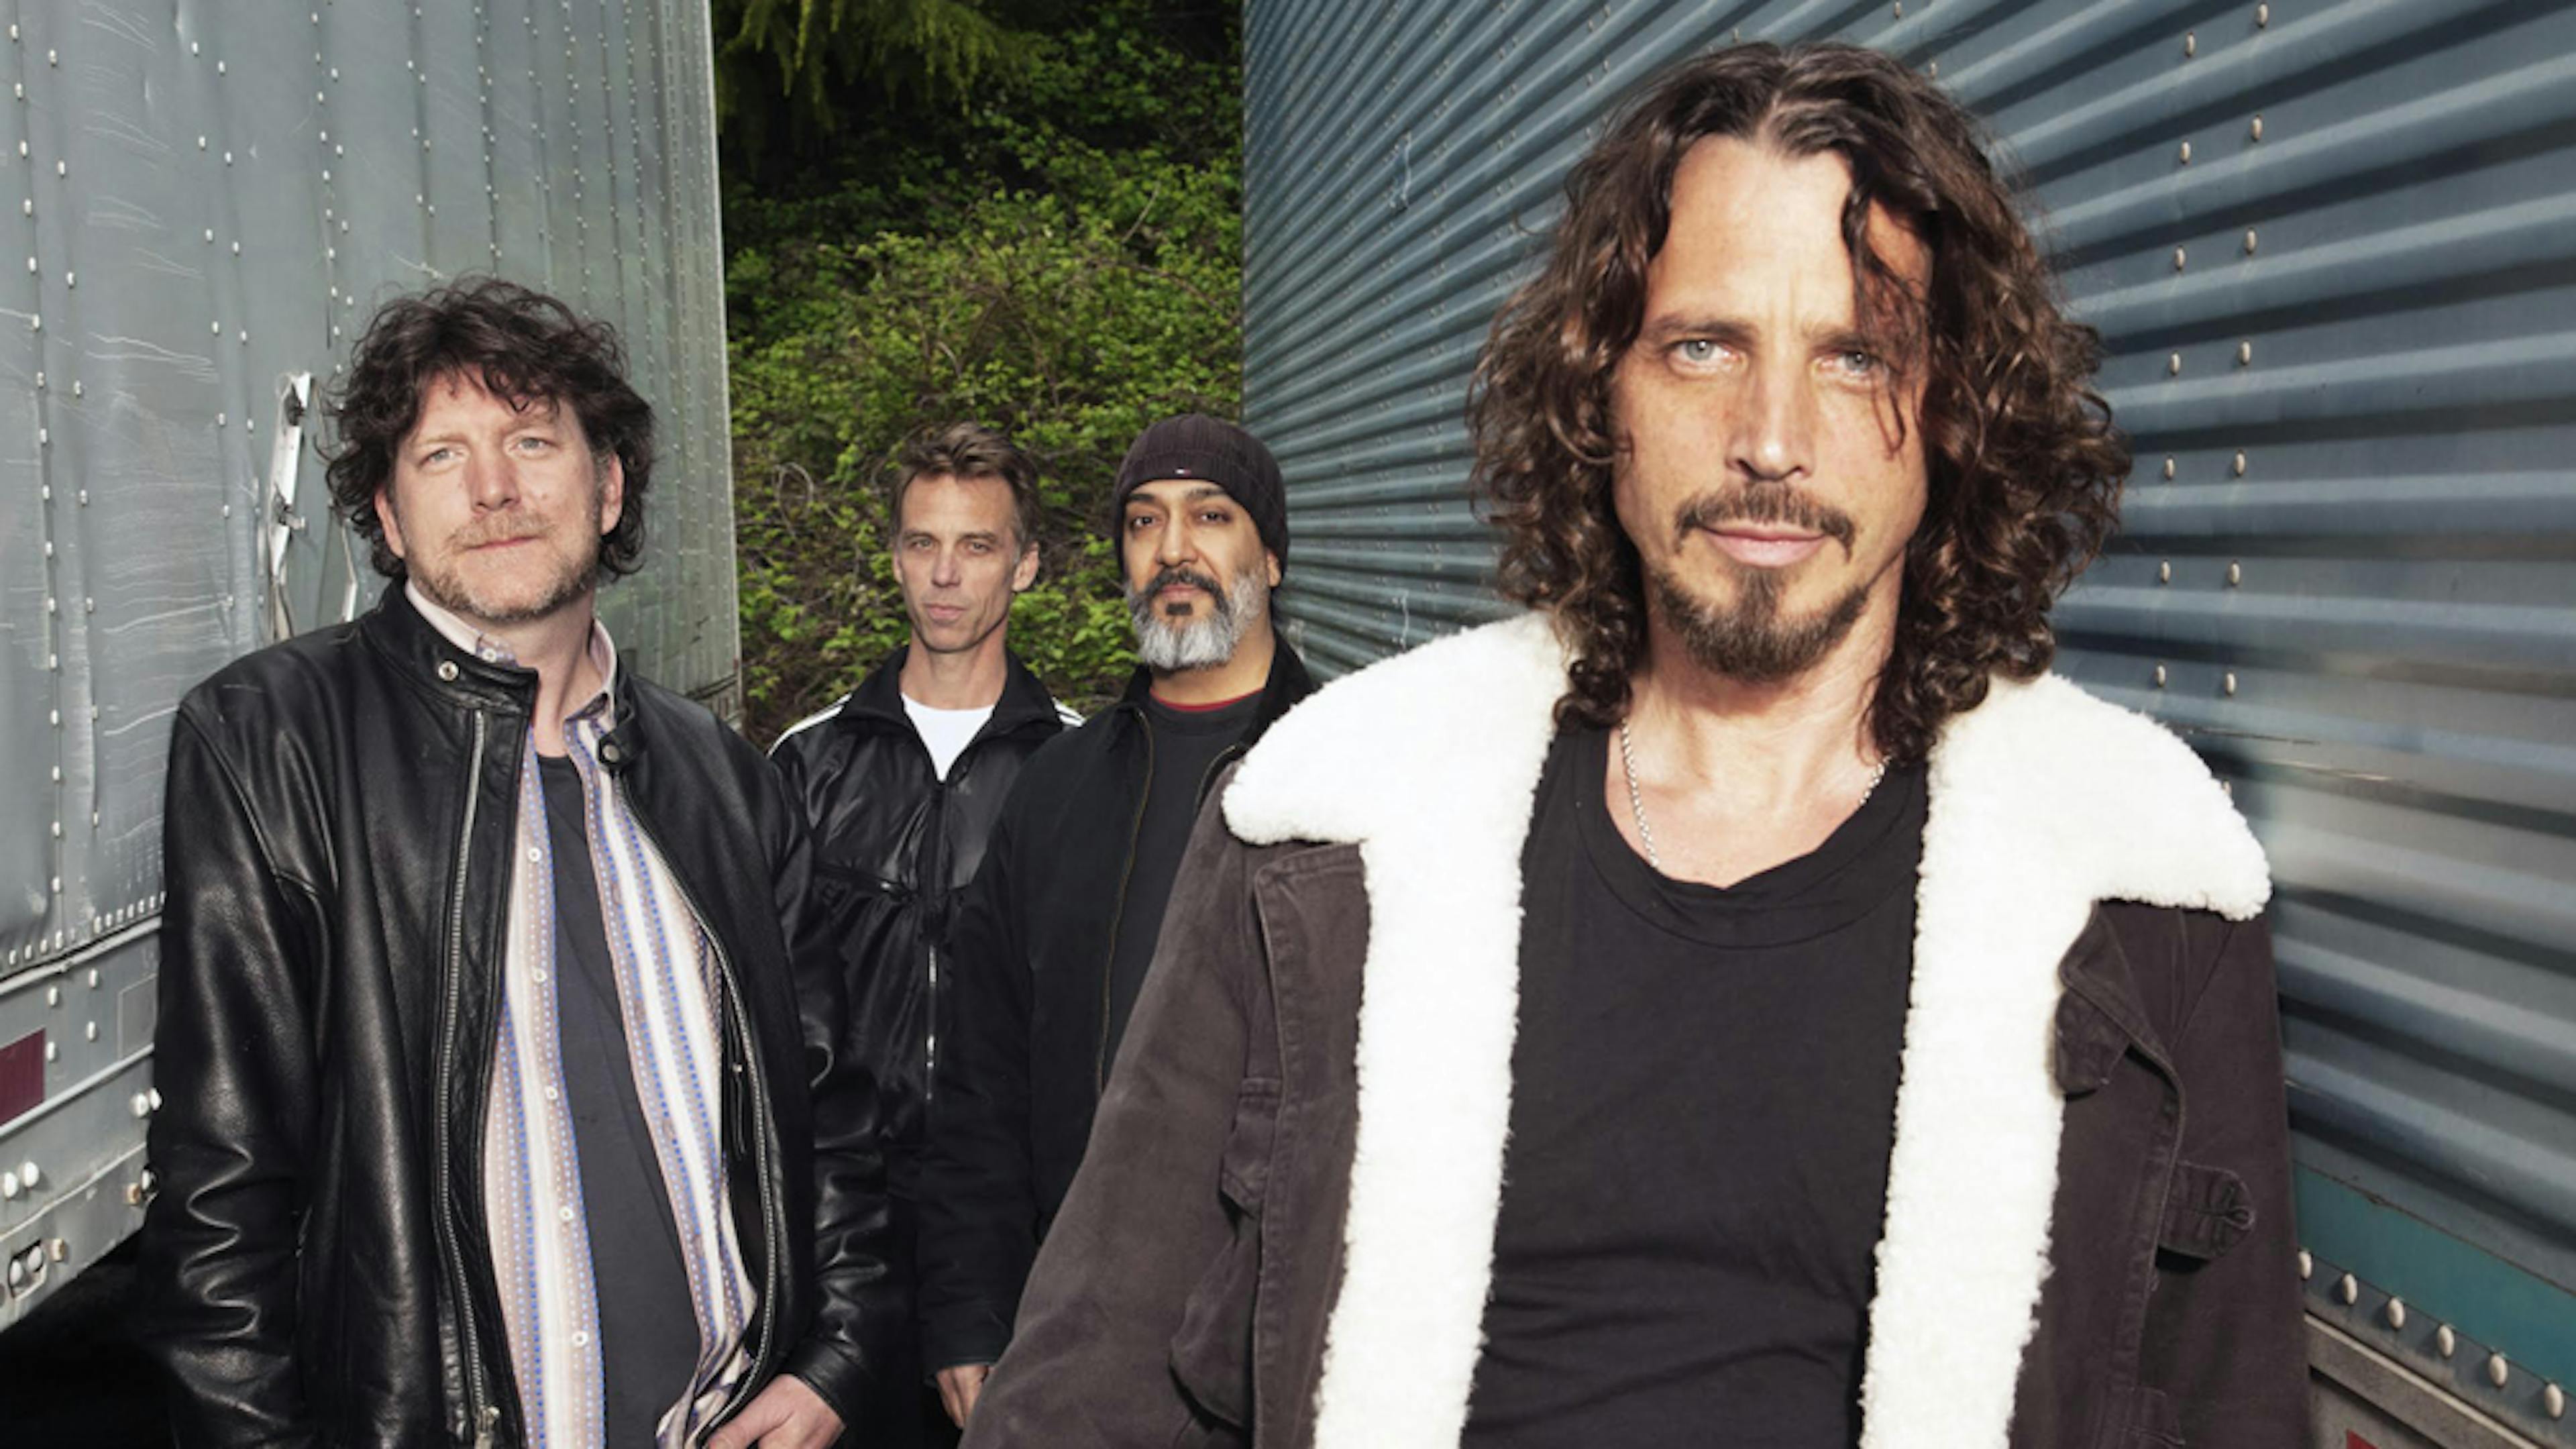 Matt Cameron on final Soundgarden songs: “Everything is on hold right now”